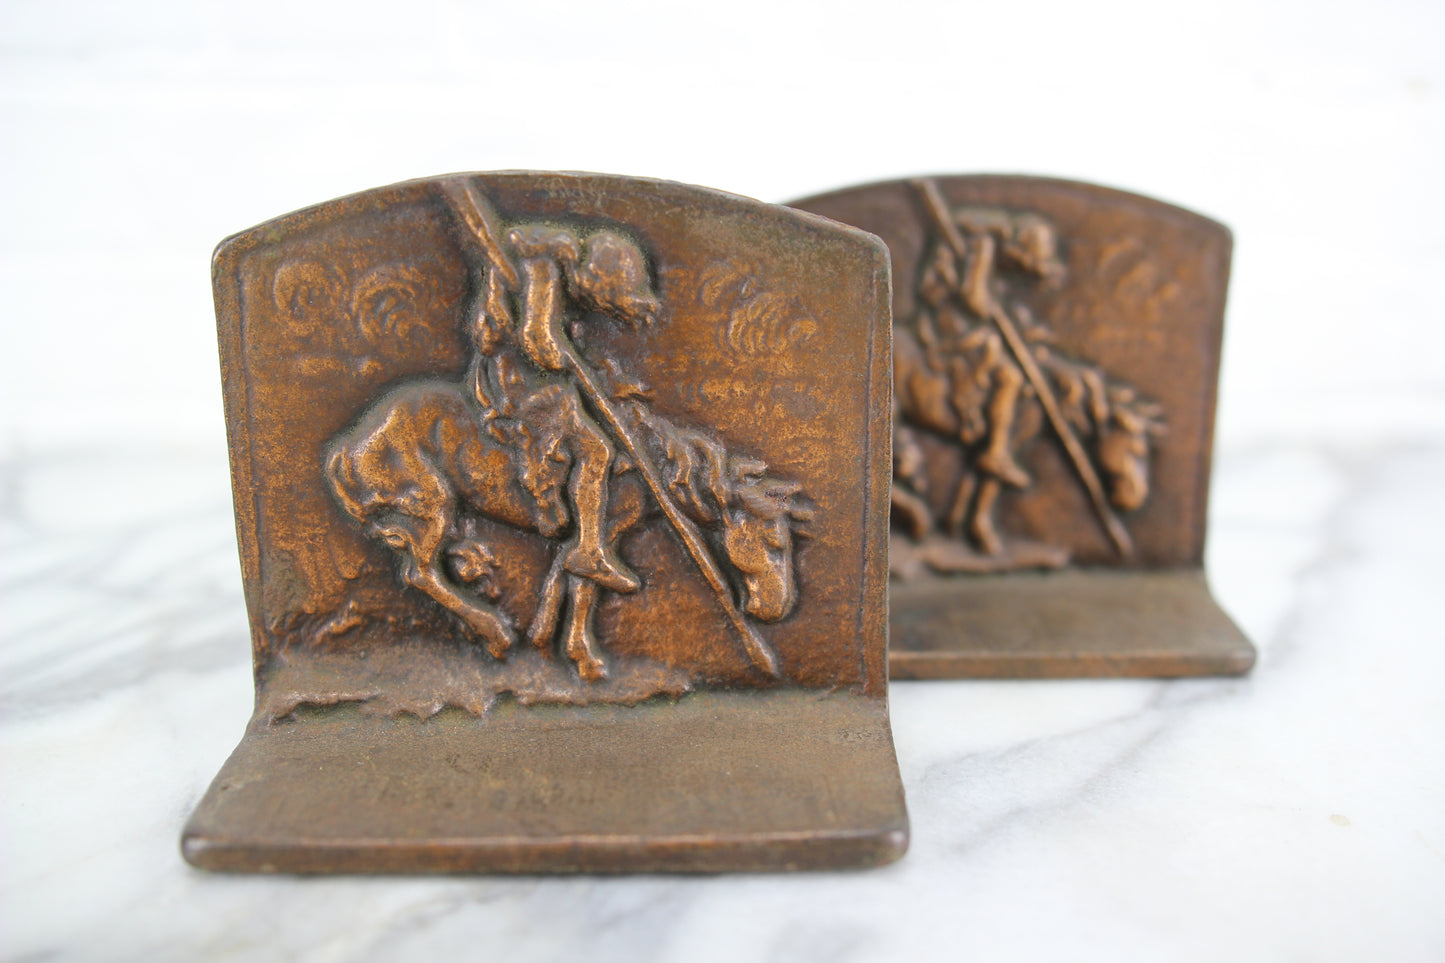 James Earle Fraser's "End of the Trail" Cast Iron Native American Indian Bookends, Pair